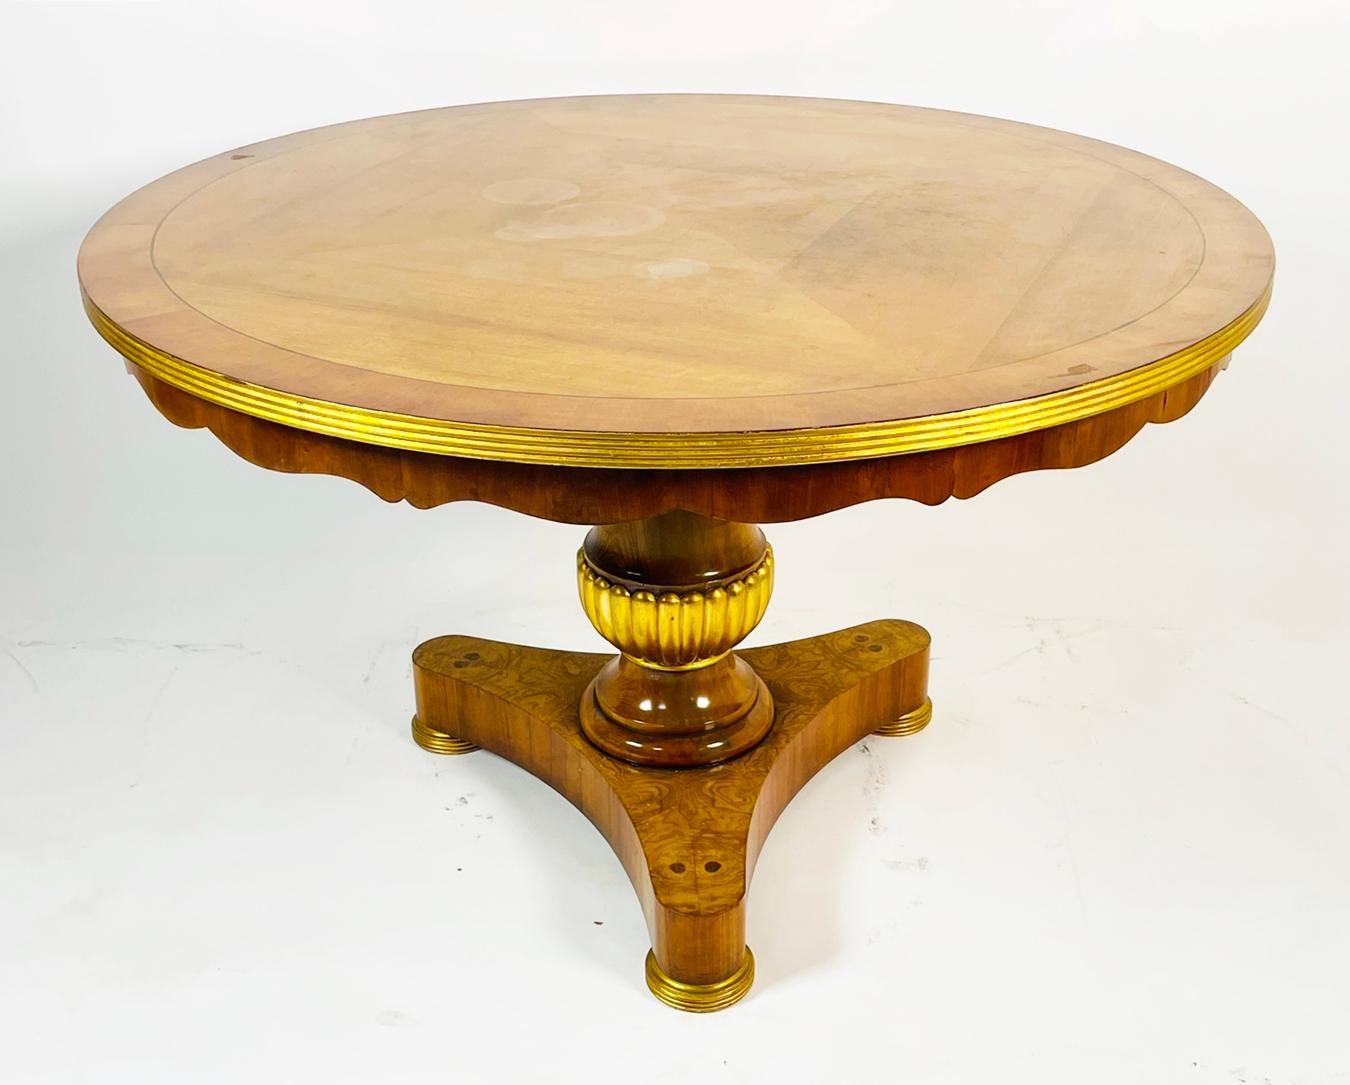 Stunningly beautiful center or dining table designed by Charles Pollock for William Switzer.

The table has a combination of solid woods and veneers such as burlwood on the base along with solid walnut and giltwood accents.

The table retains